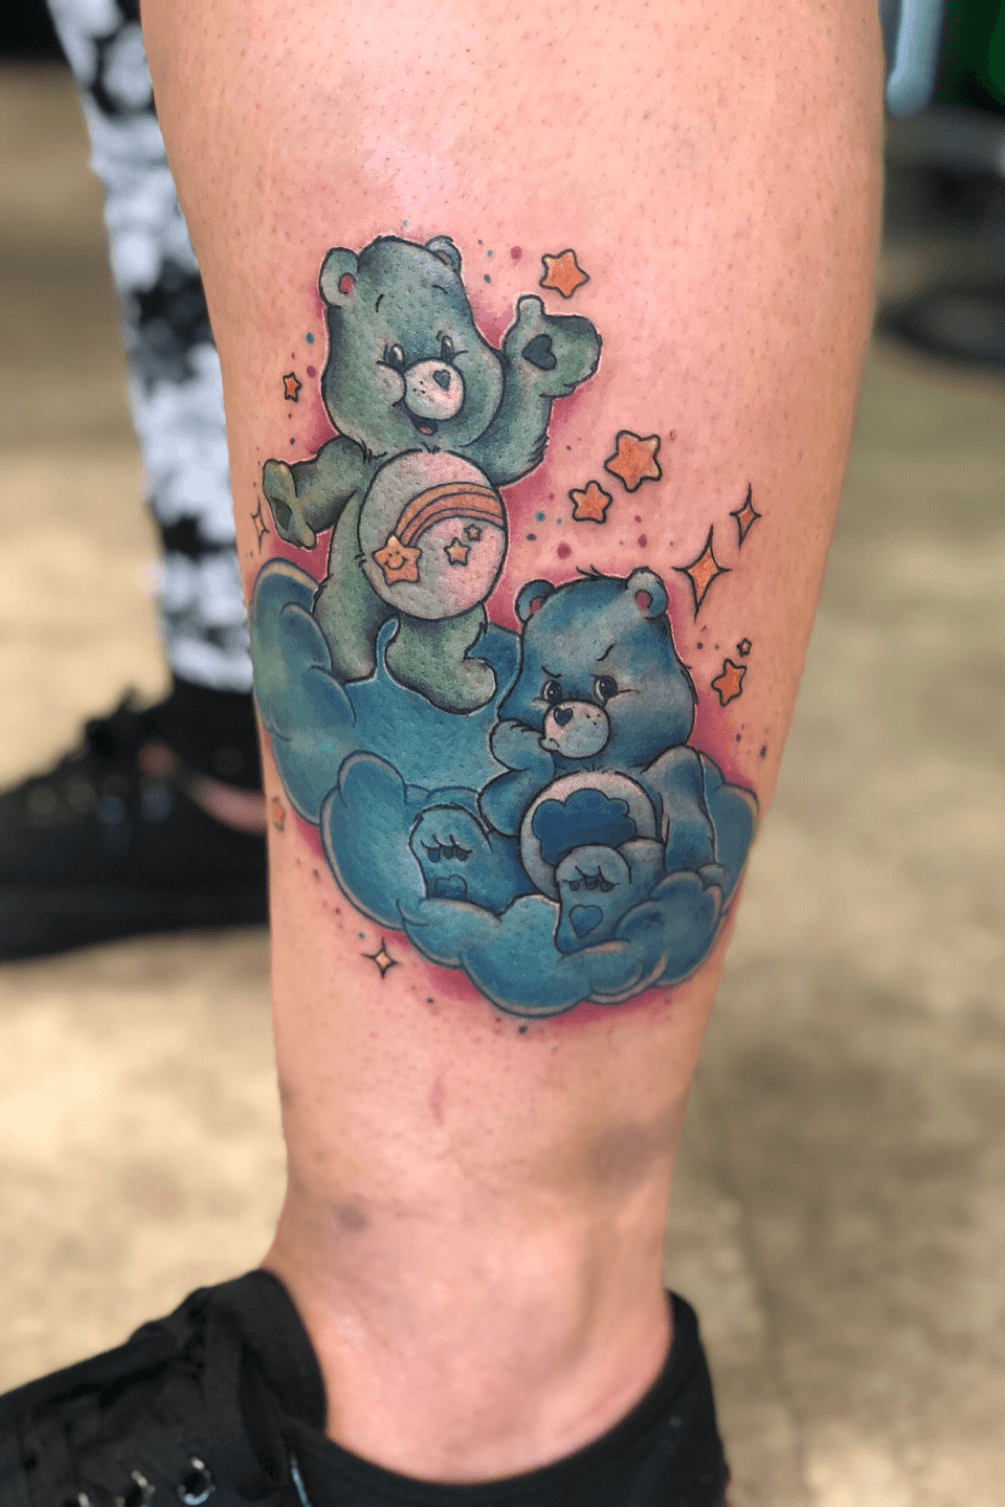 Little Grumpy Bear cover up done by  Golden Ink Tattoo  Facebook